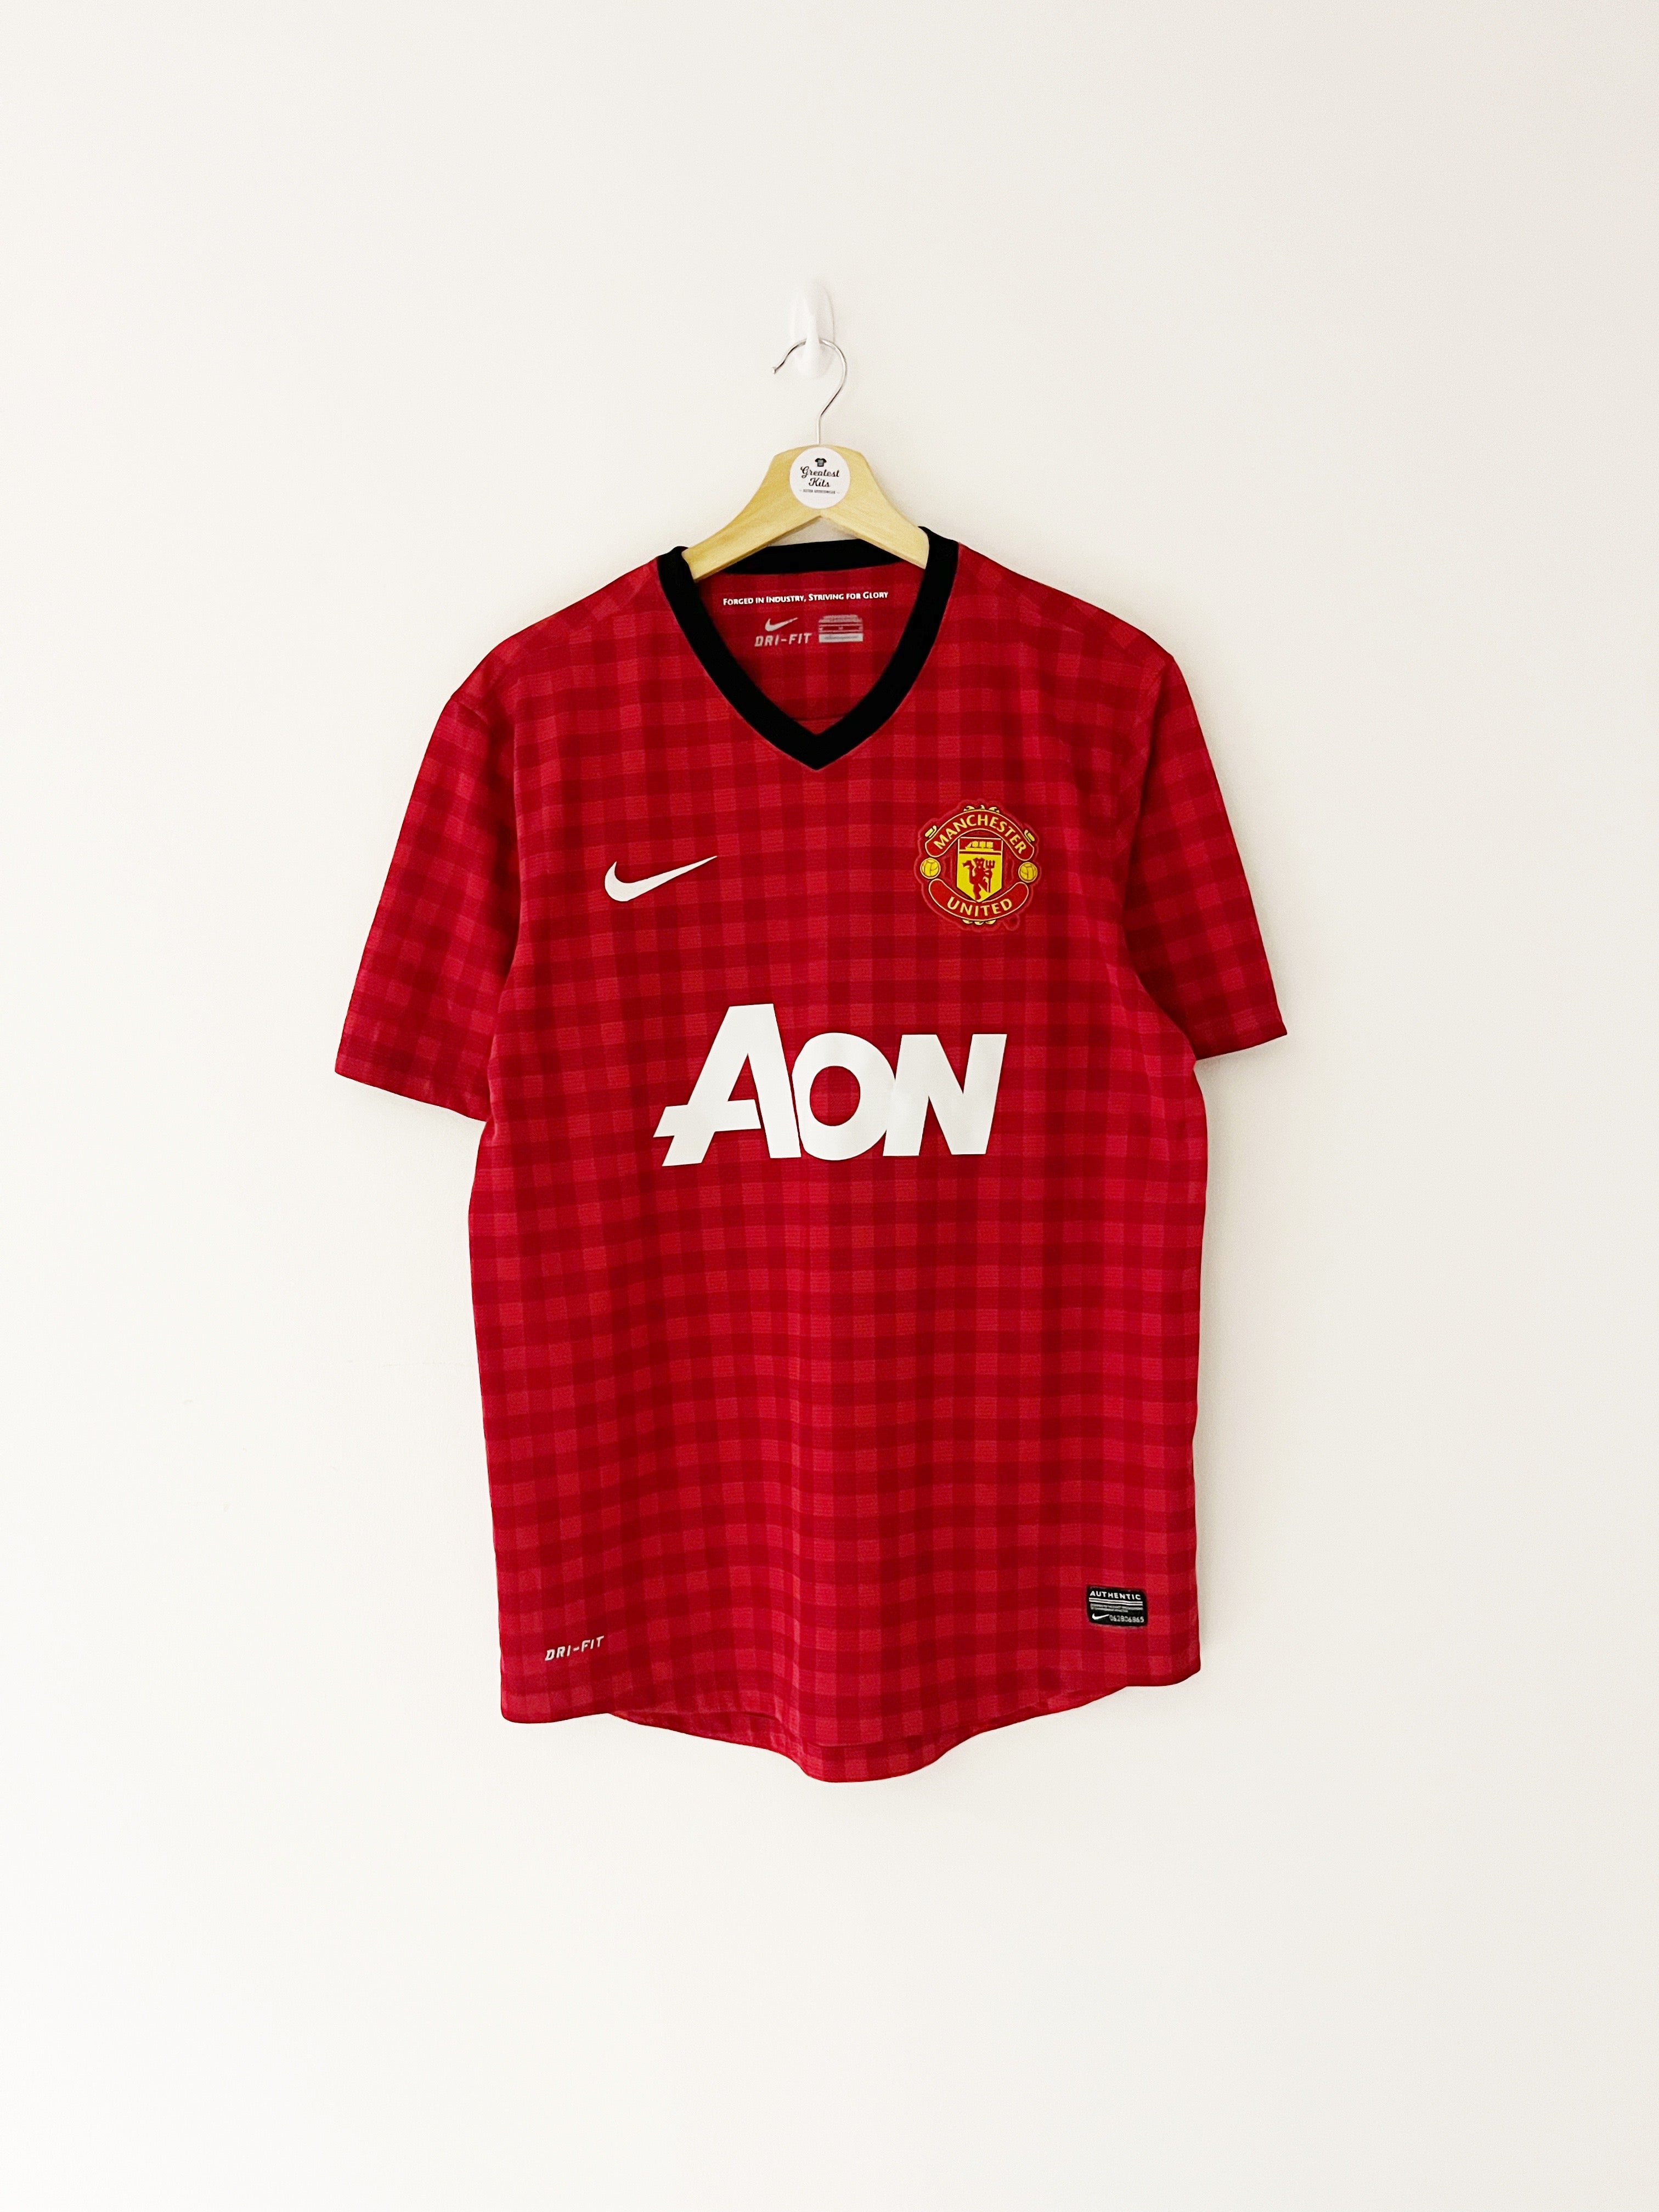 2012/13 Manchester United Home Shirt (M) 8.5/10